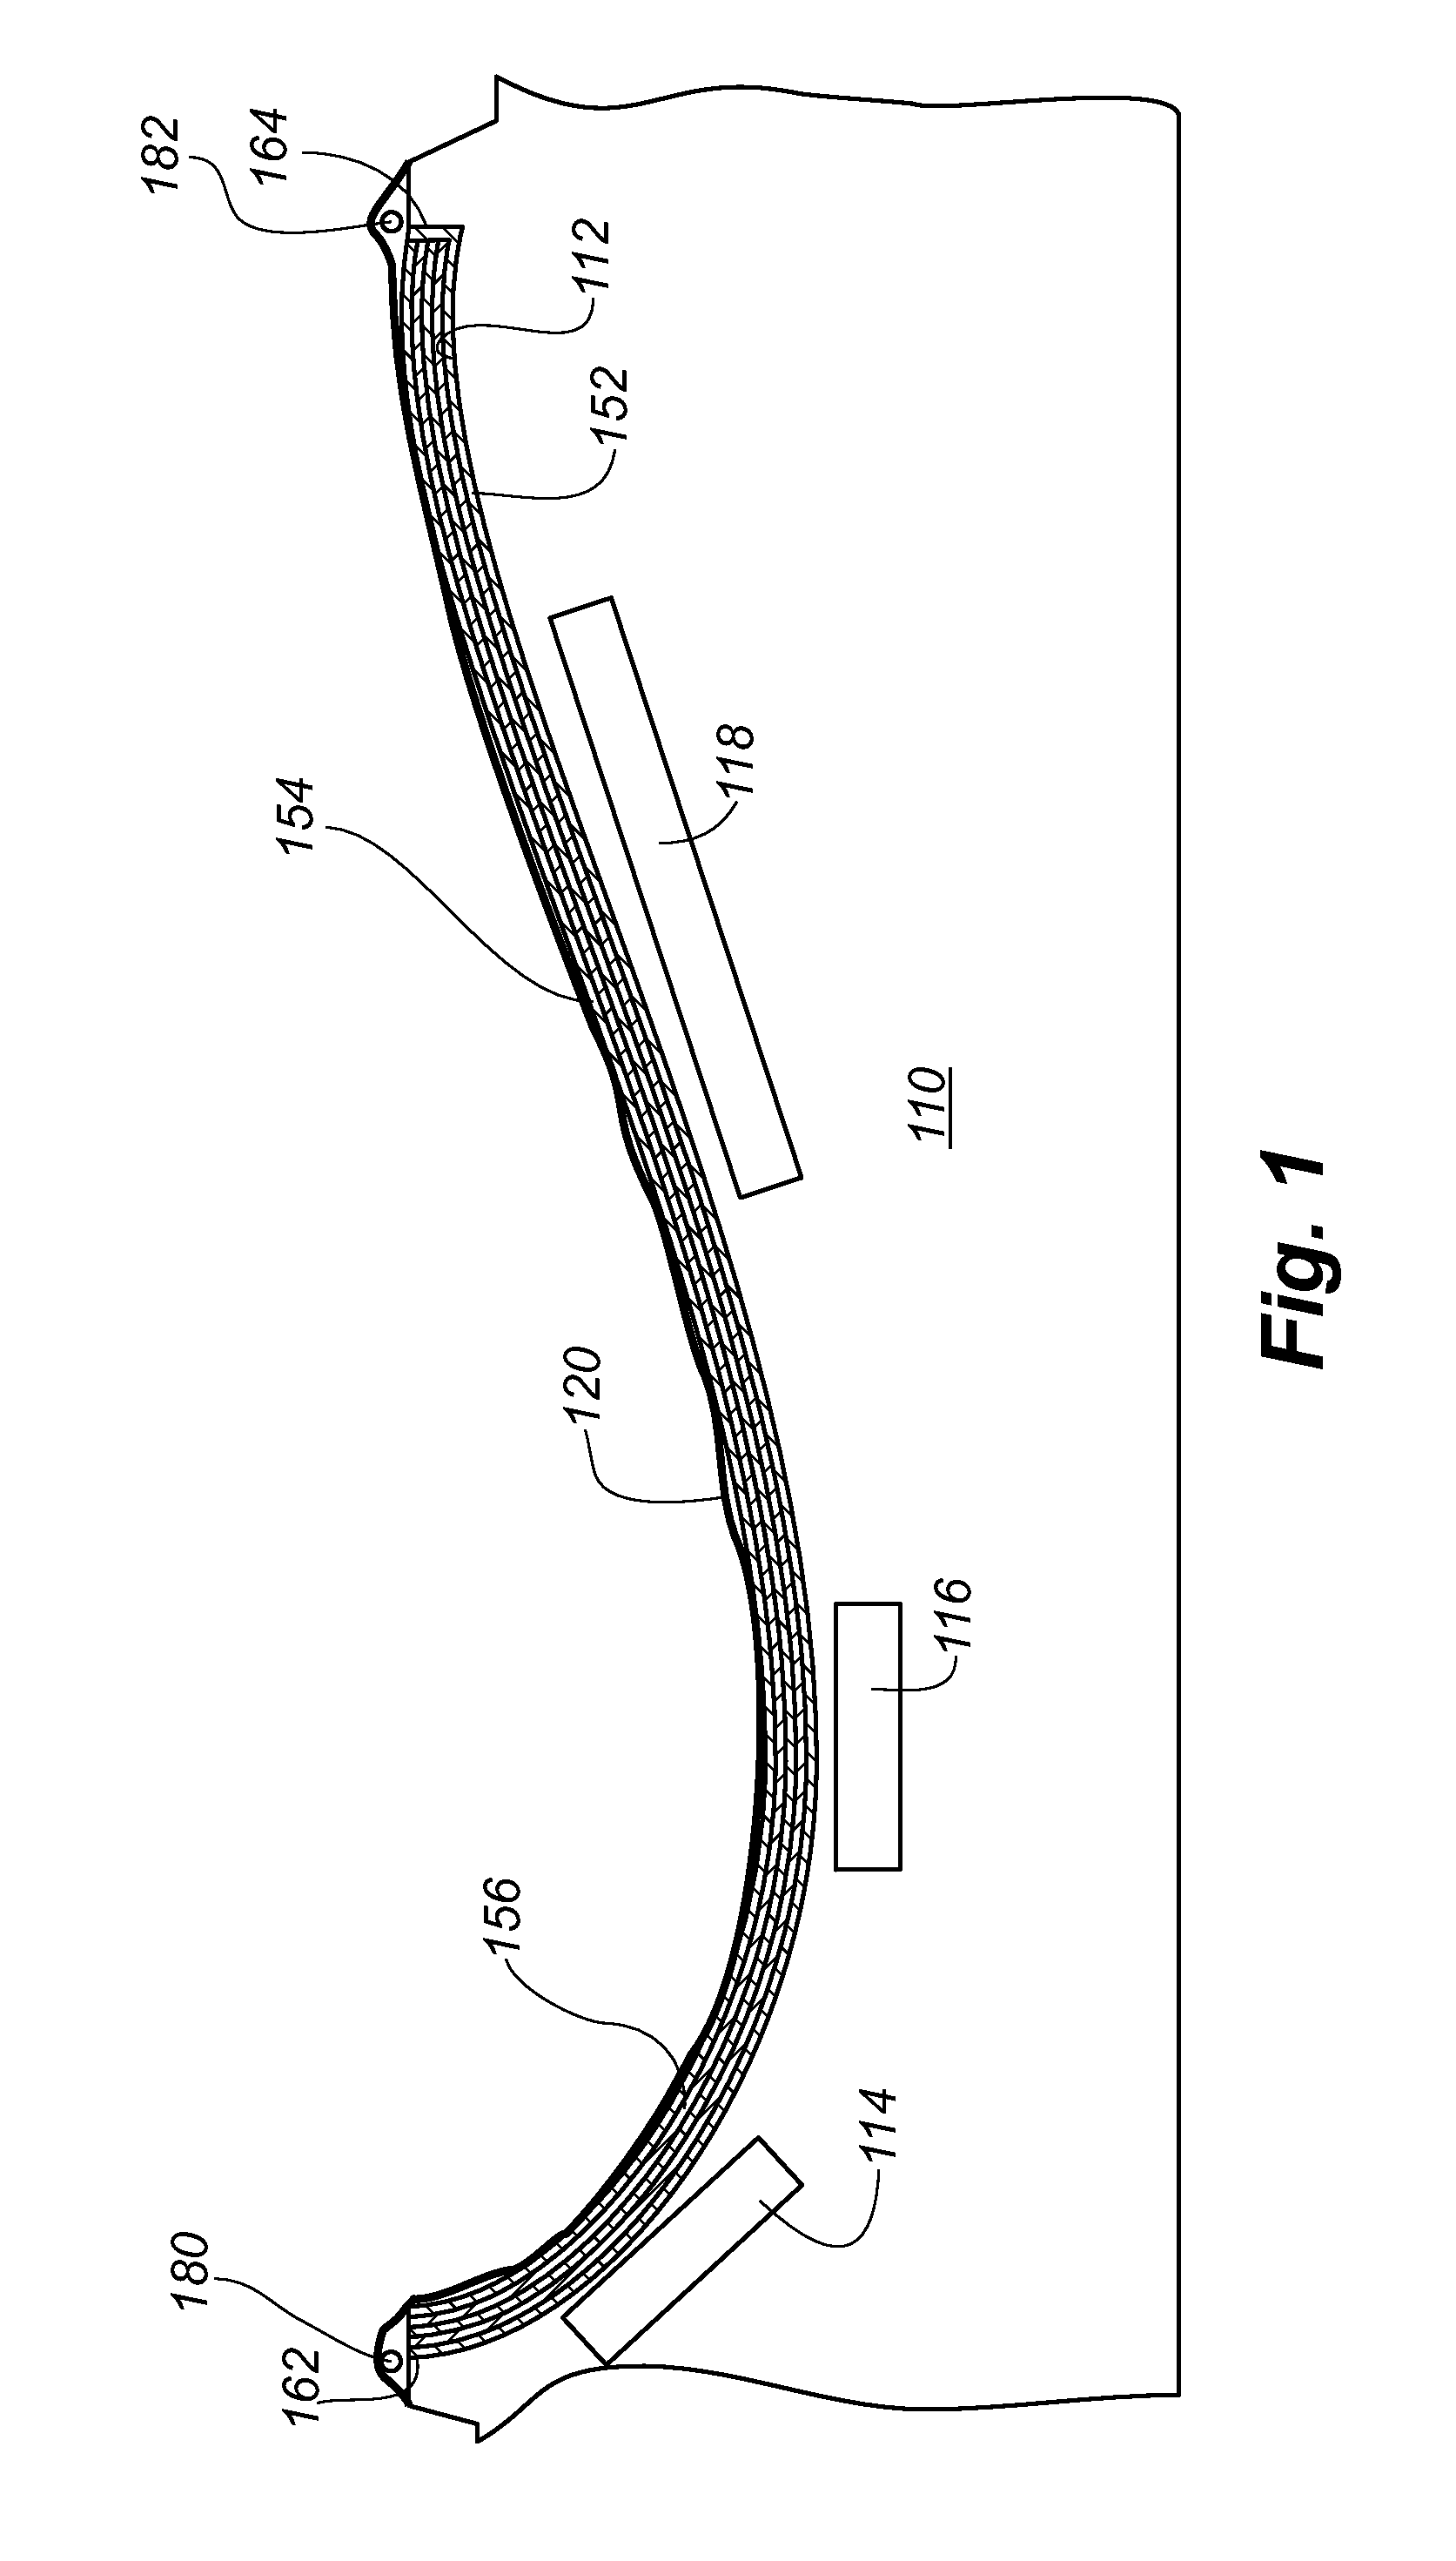 Method of manufacturing a wind turbine blade comprising steel wire reinforced matrix material